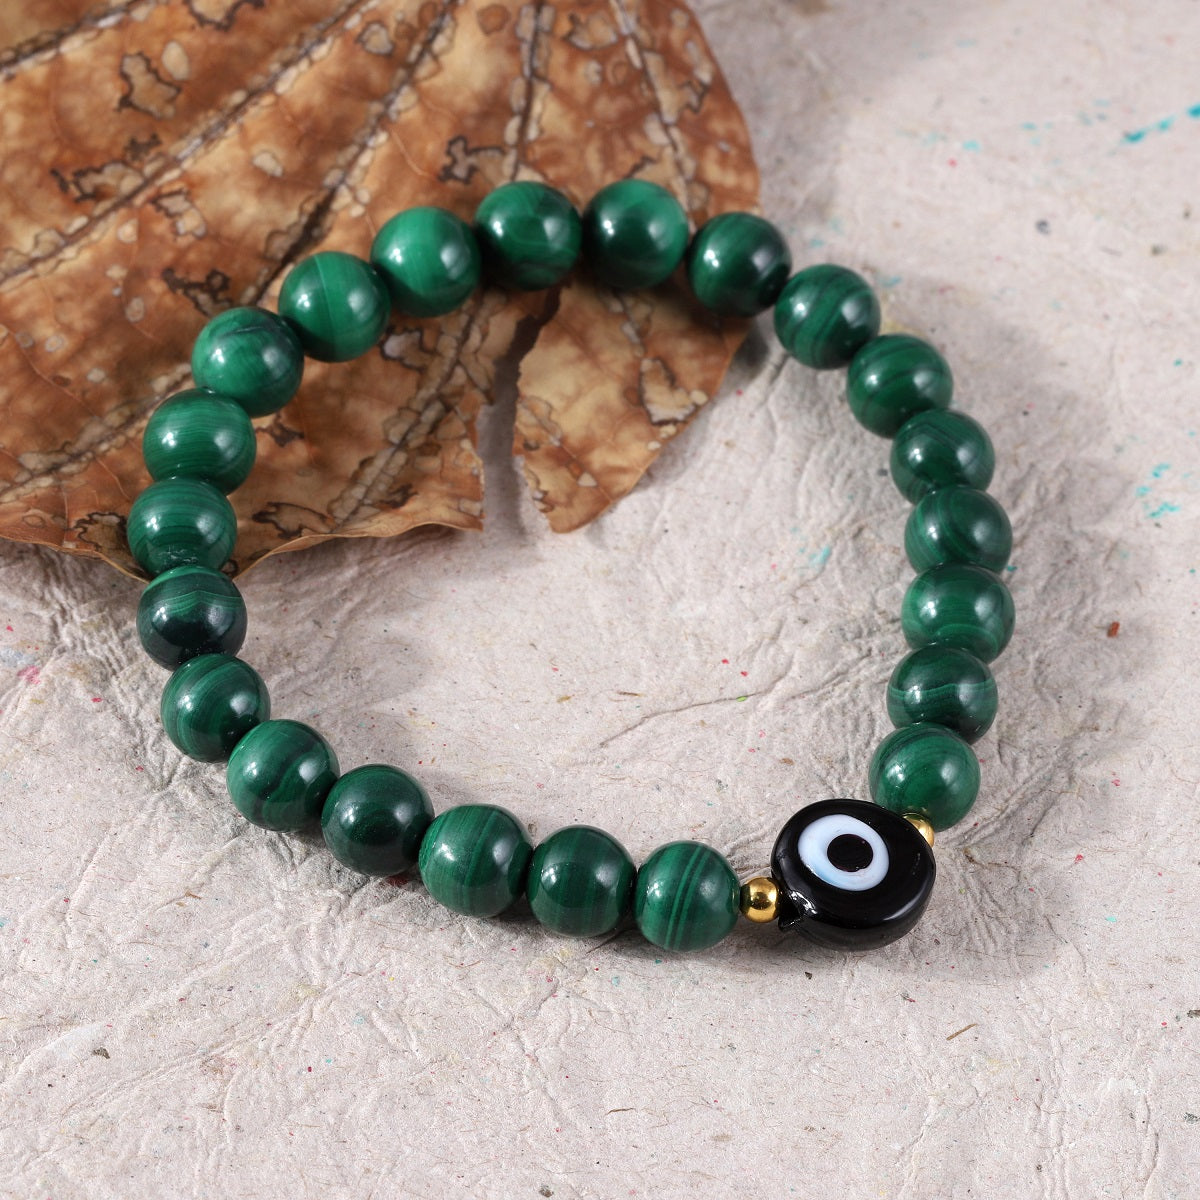 An assortment of beautifully handcrafted Friendship Bracelets, each featuring unique gemstone combinations.